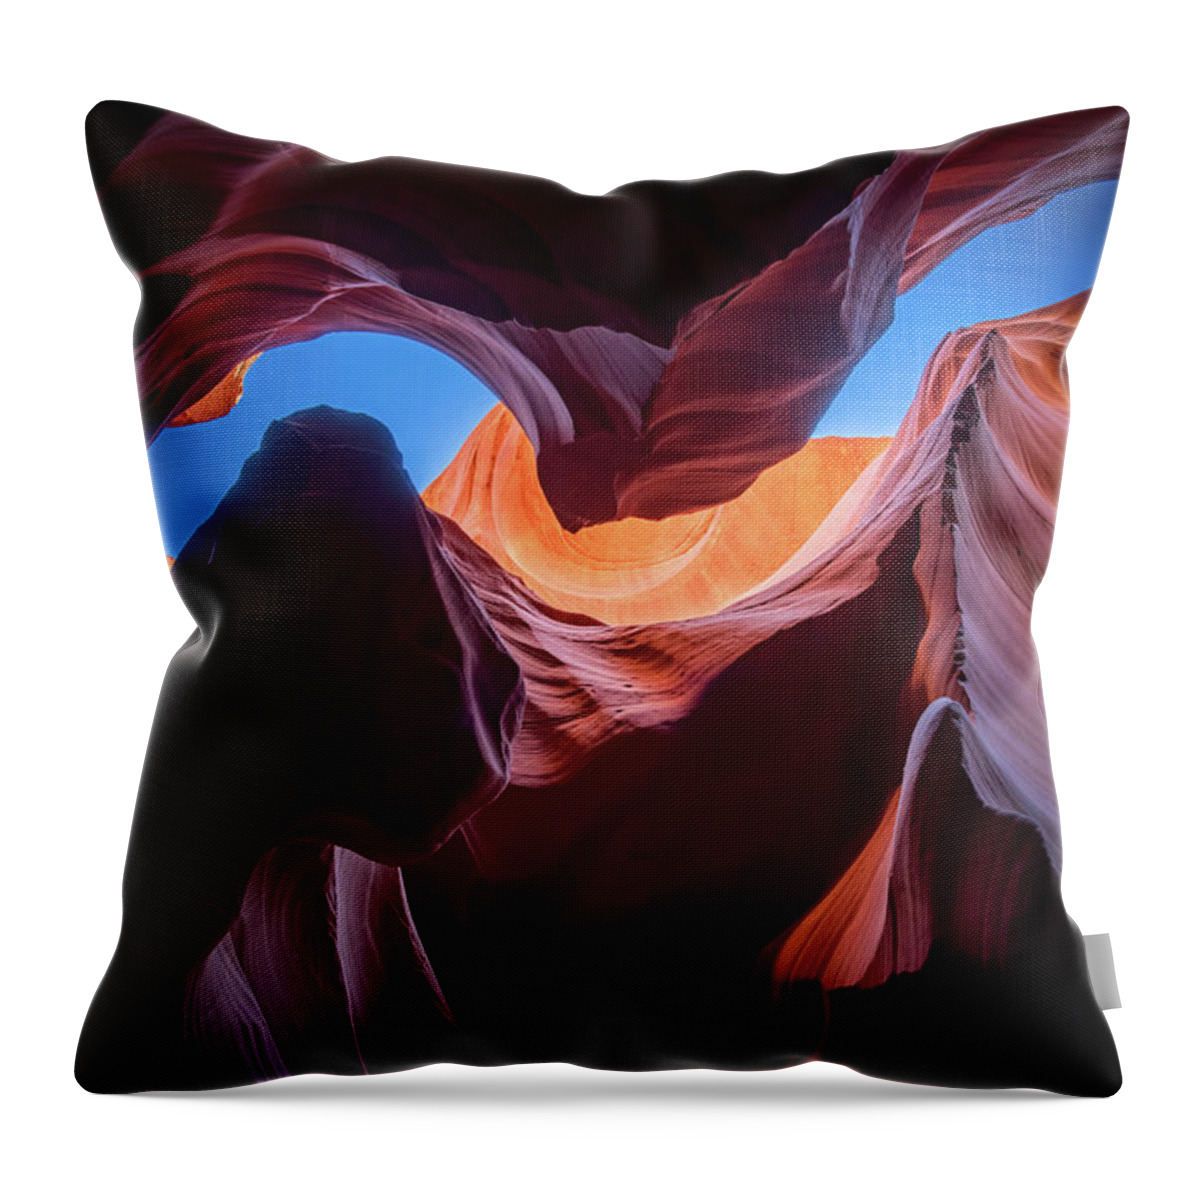 Amaizing Throw Pillow featuring the photograph Sculptures Of Desert by Edgars Erglis